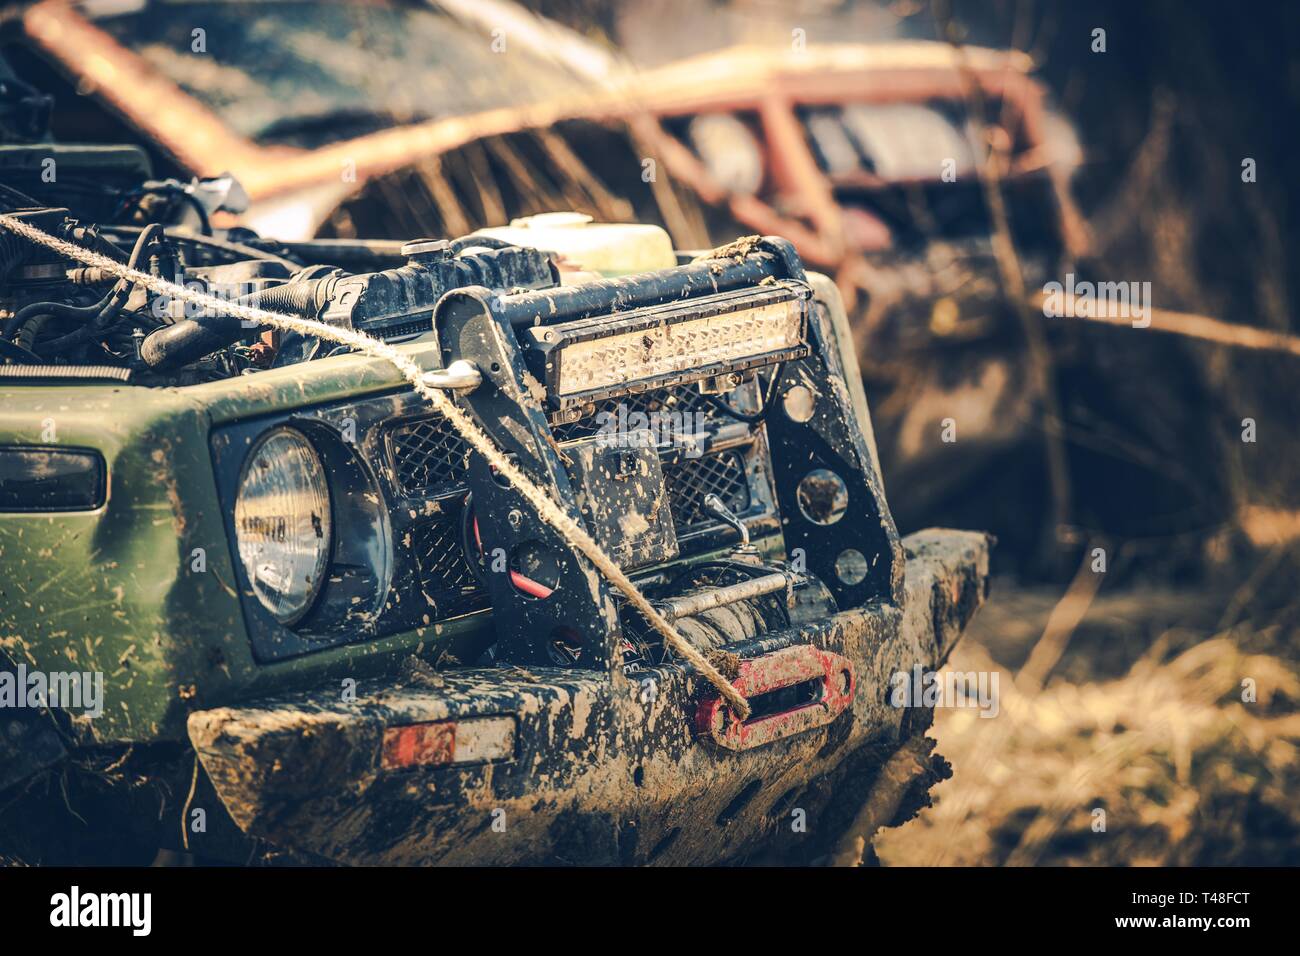 Off Road Expedition. Two Dirty Sport Utility Vehicles Covered by Mud. Motorsport Theme. Stock Photo